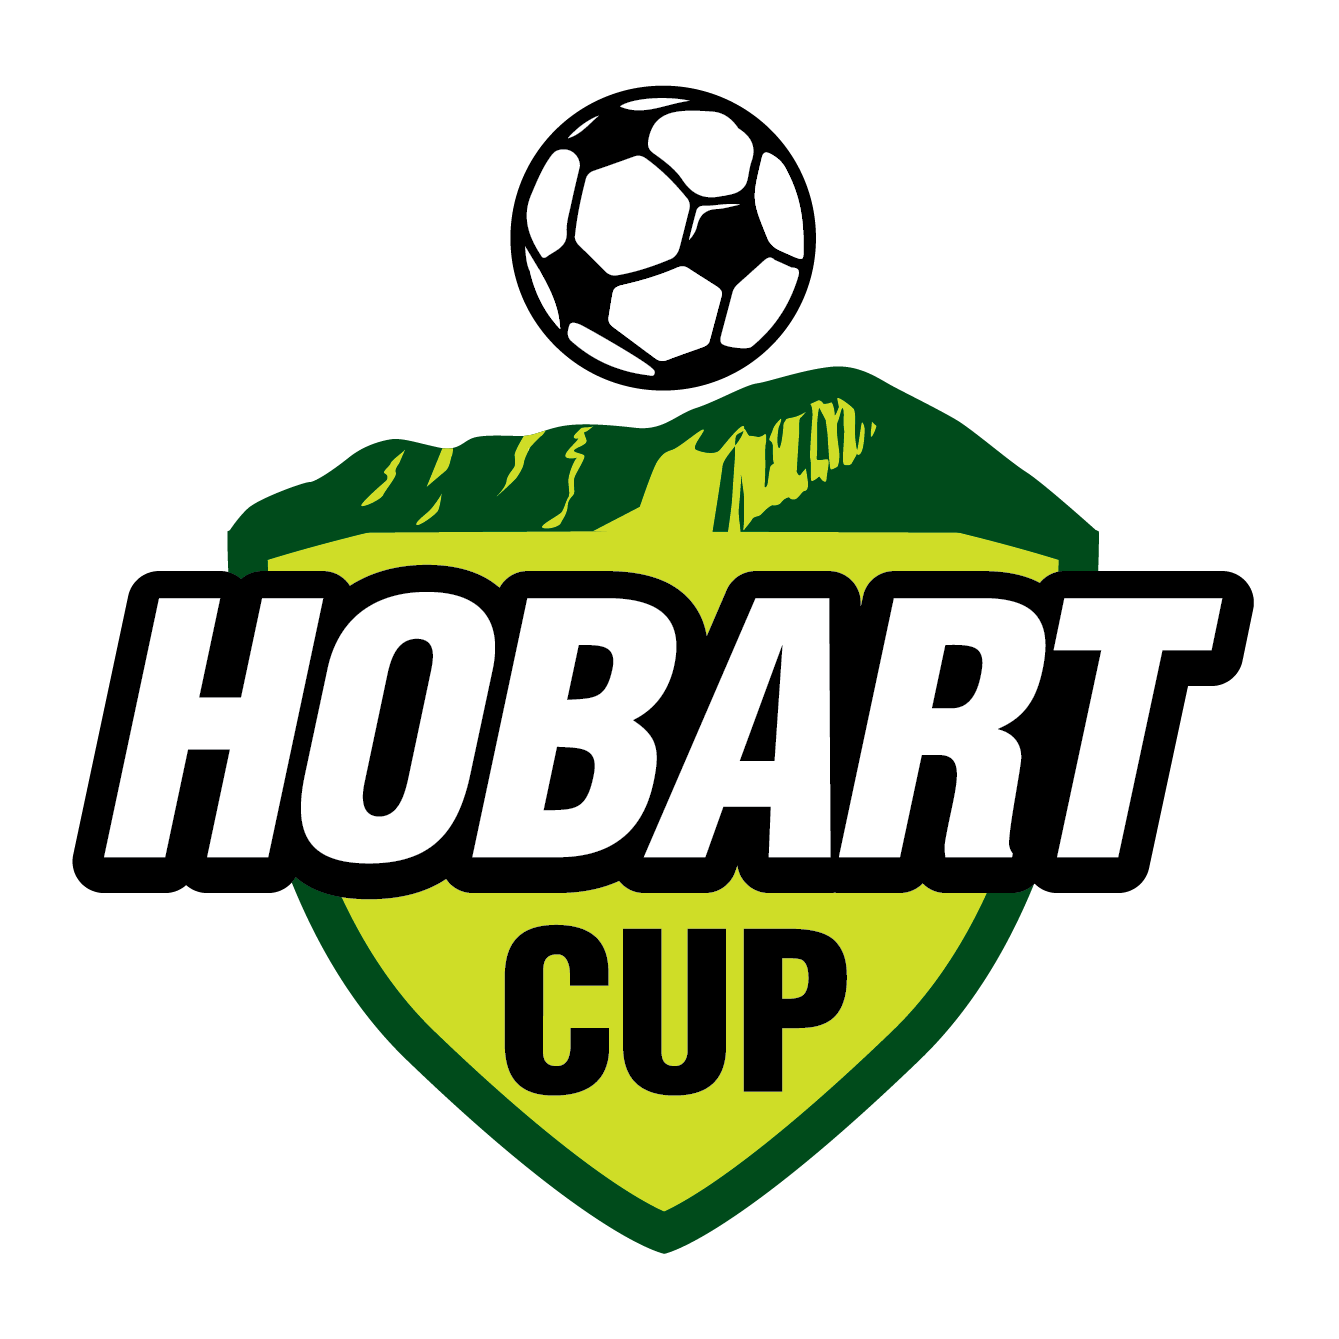 The Hobart Cup